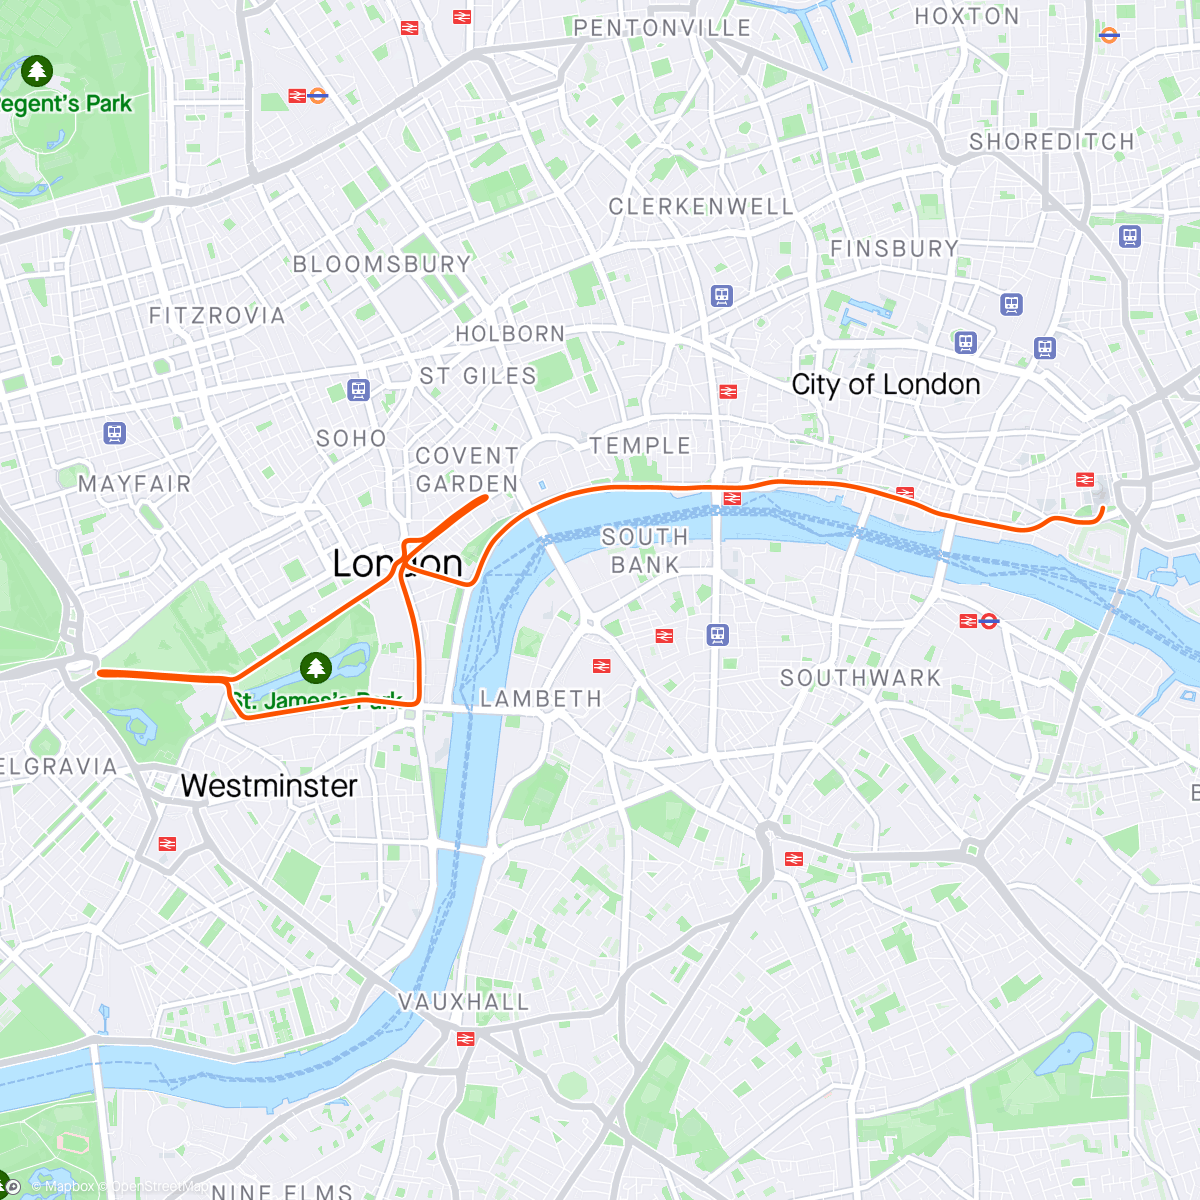 「Zwift - Group Ride: WMZ Bonjour Recovery & Optional Sprints (p/b Champion Systems) (D) on Classique in London」活動的地圖